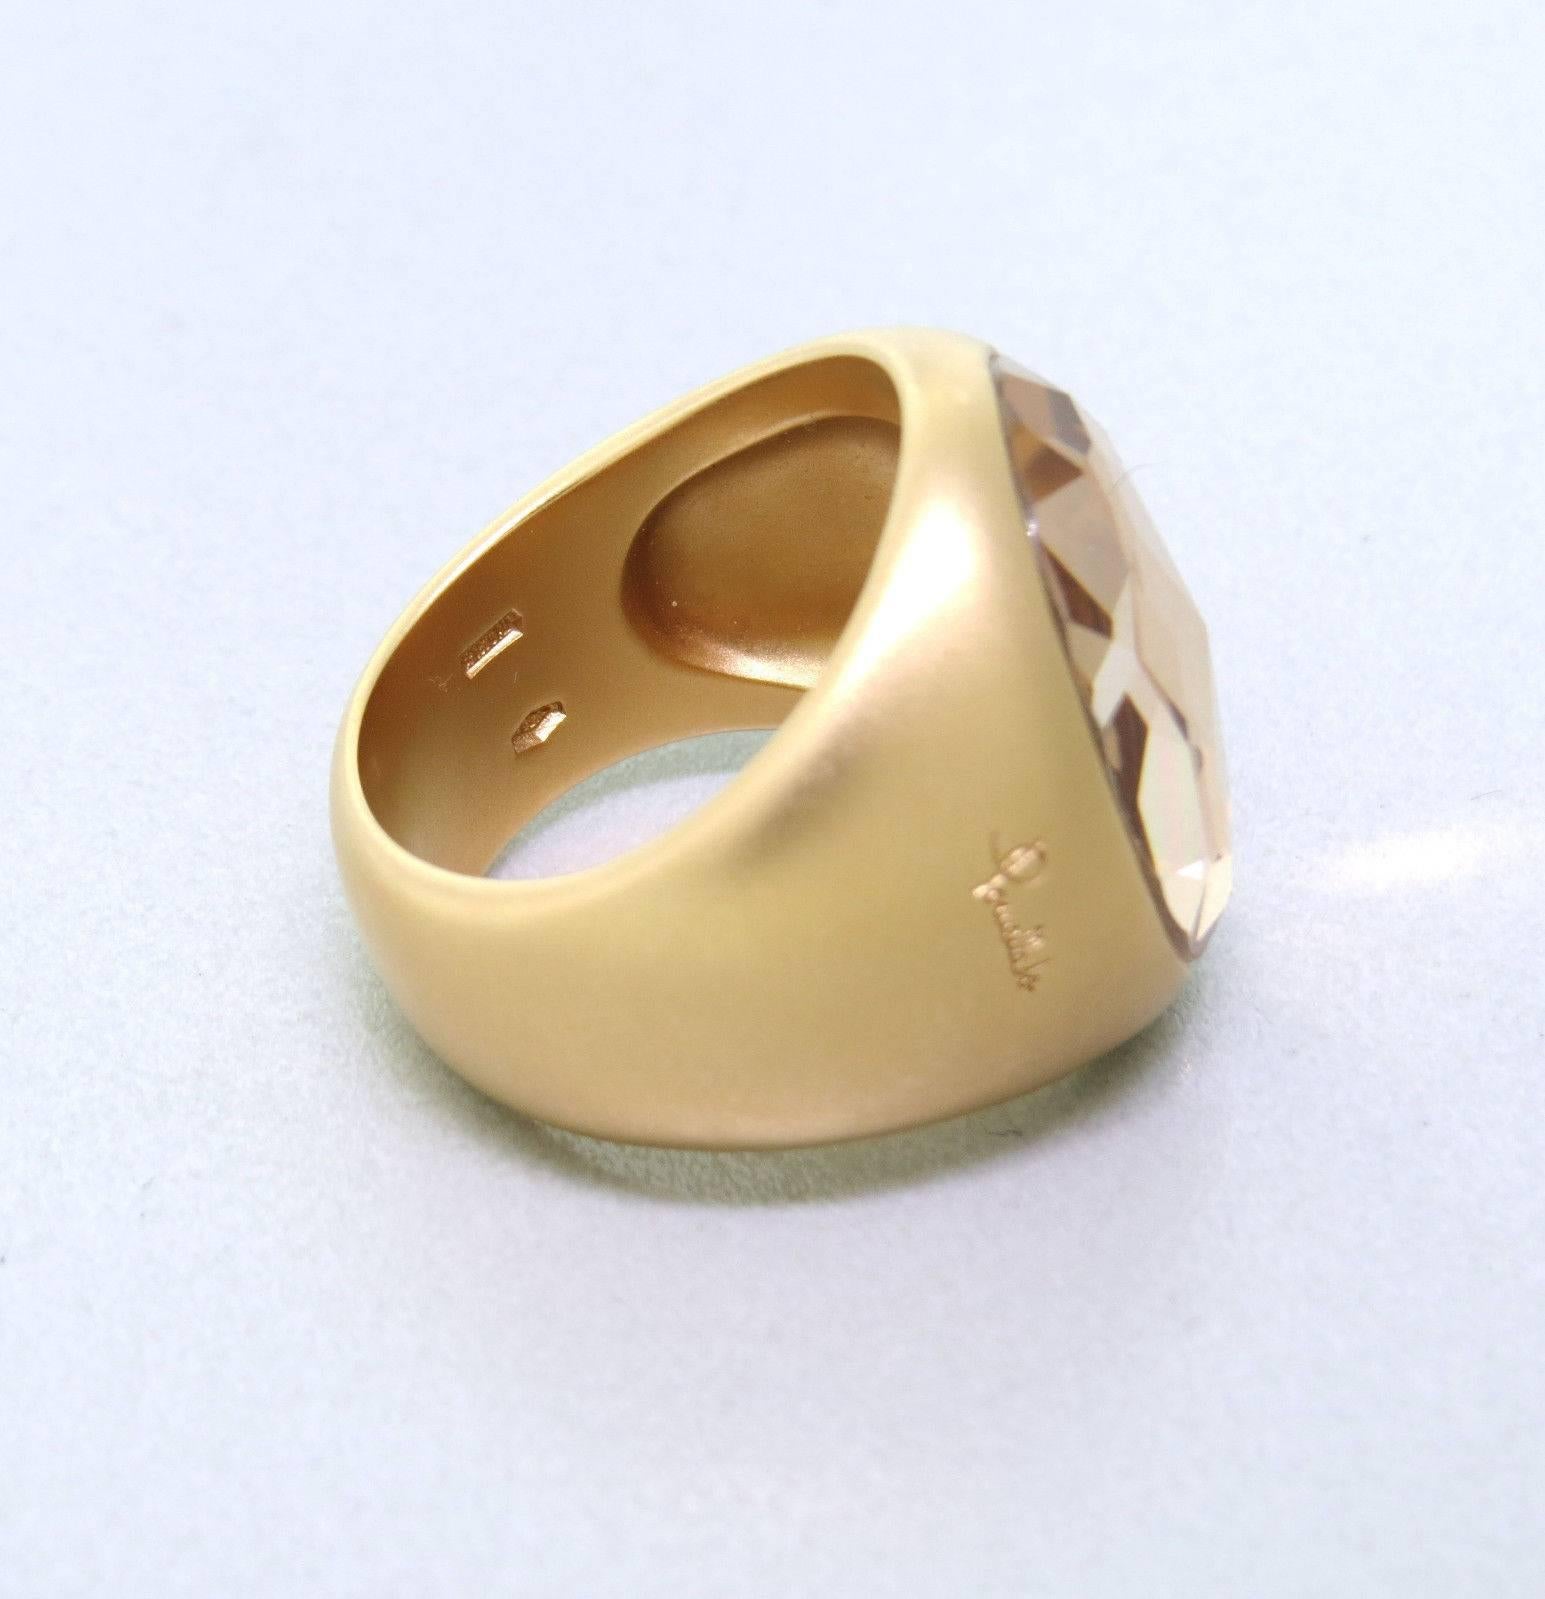 A 18k Gold ring crafted by Pomellato for the Narciso collection. Featuring rock crystal. Ring size 6 1/4 ring top is 20.5mm X 16mm. Marked Pomellato 750, weight is 18.2 grams. 